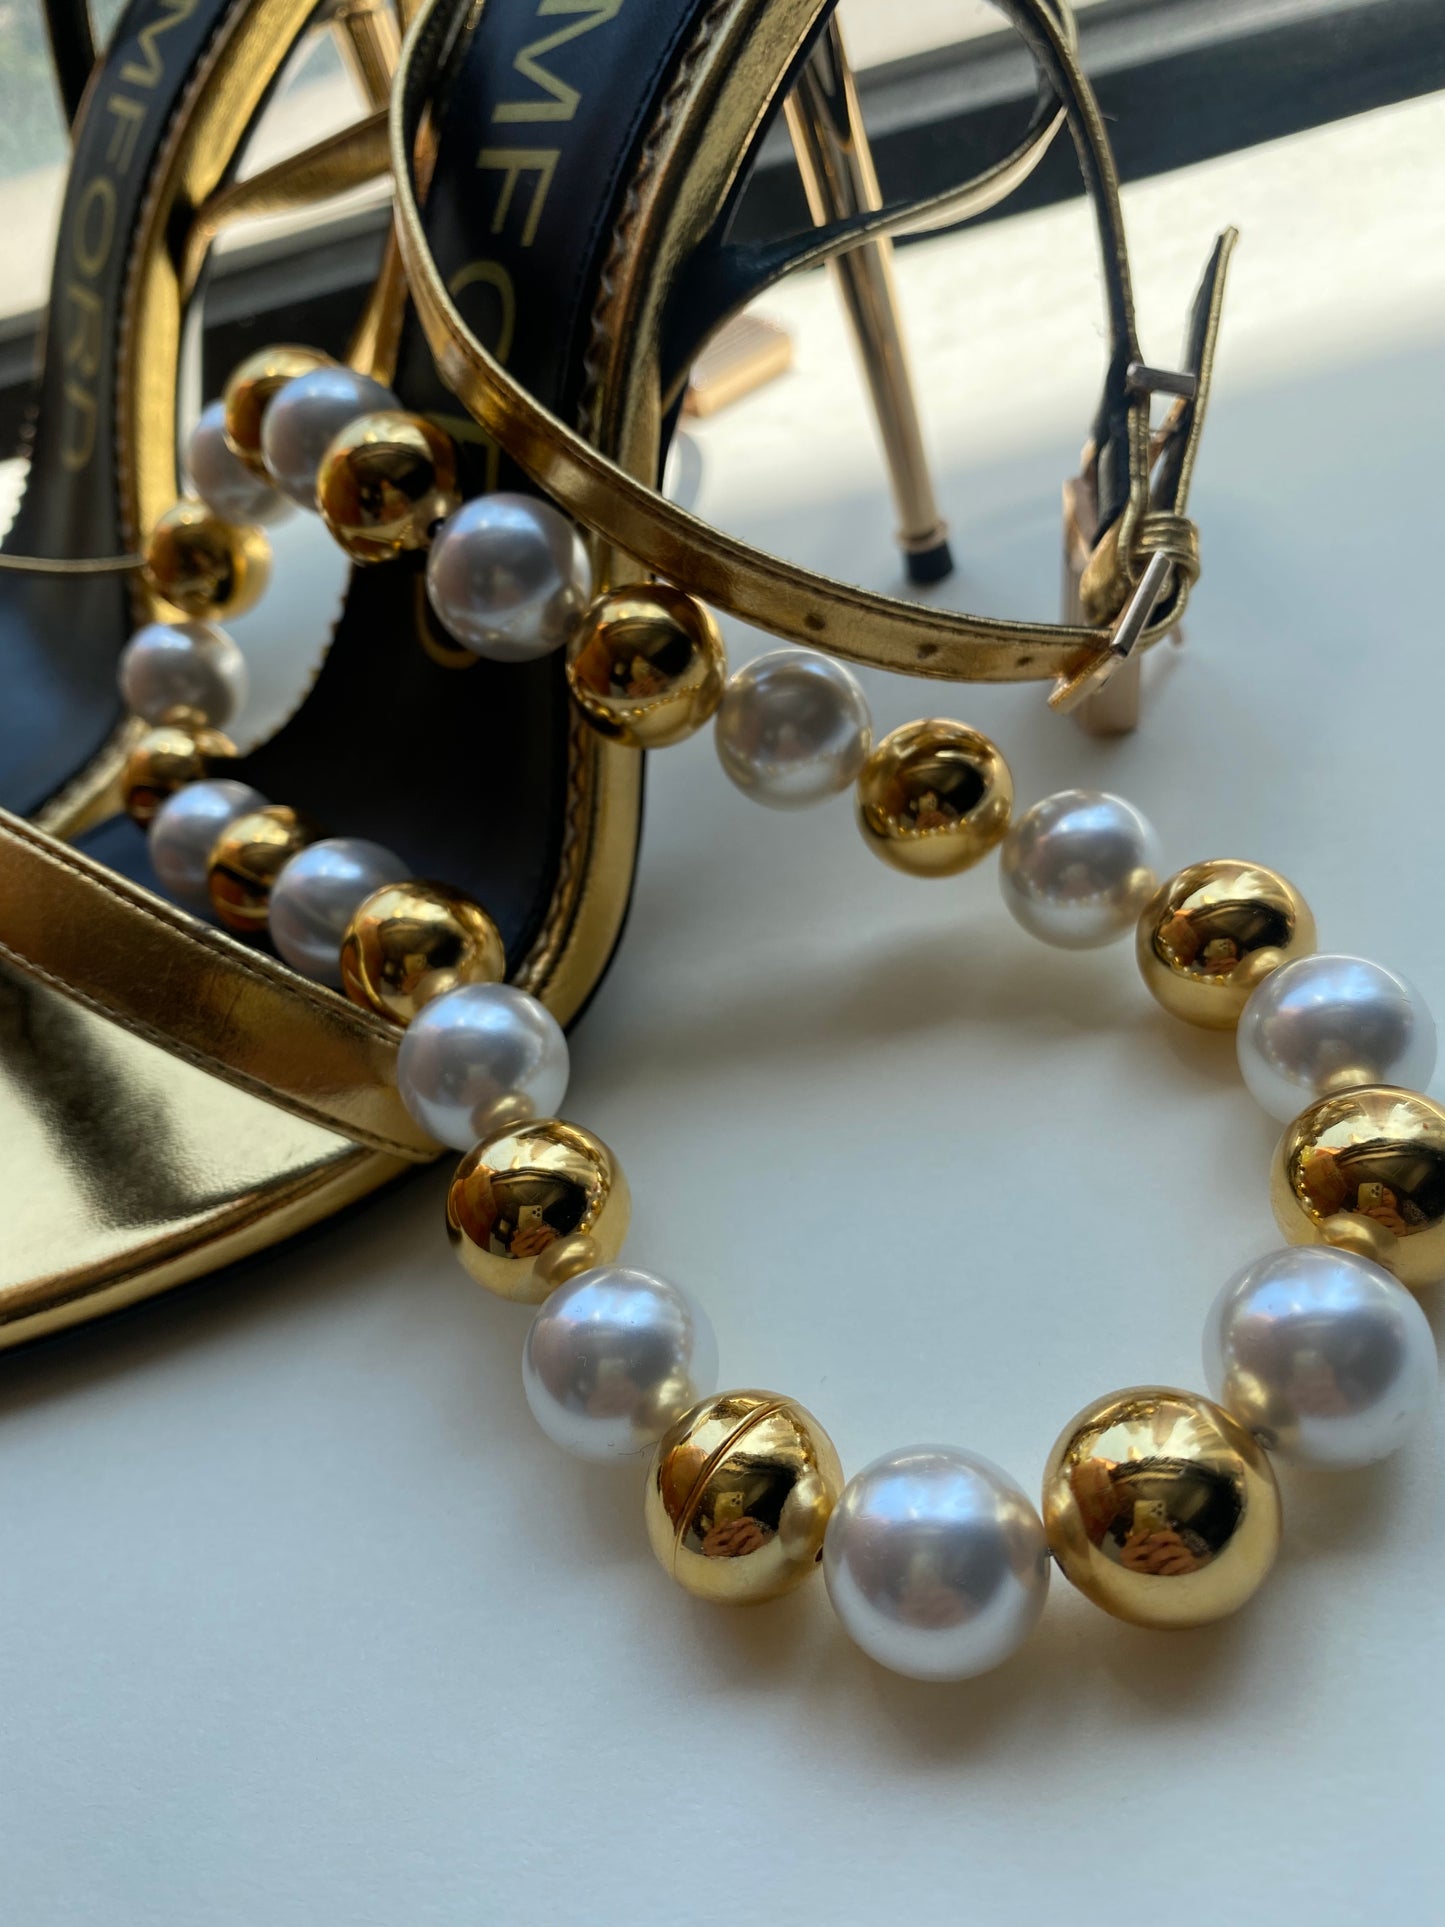 15mm gold balls and pearls in magnetic choker